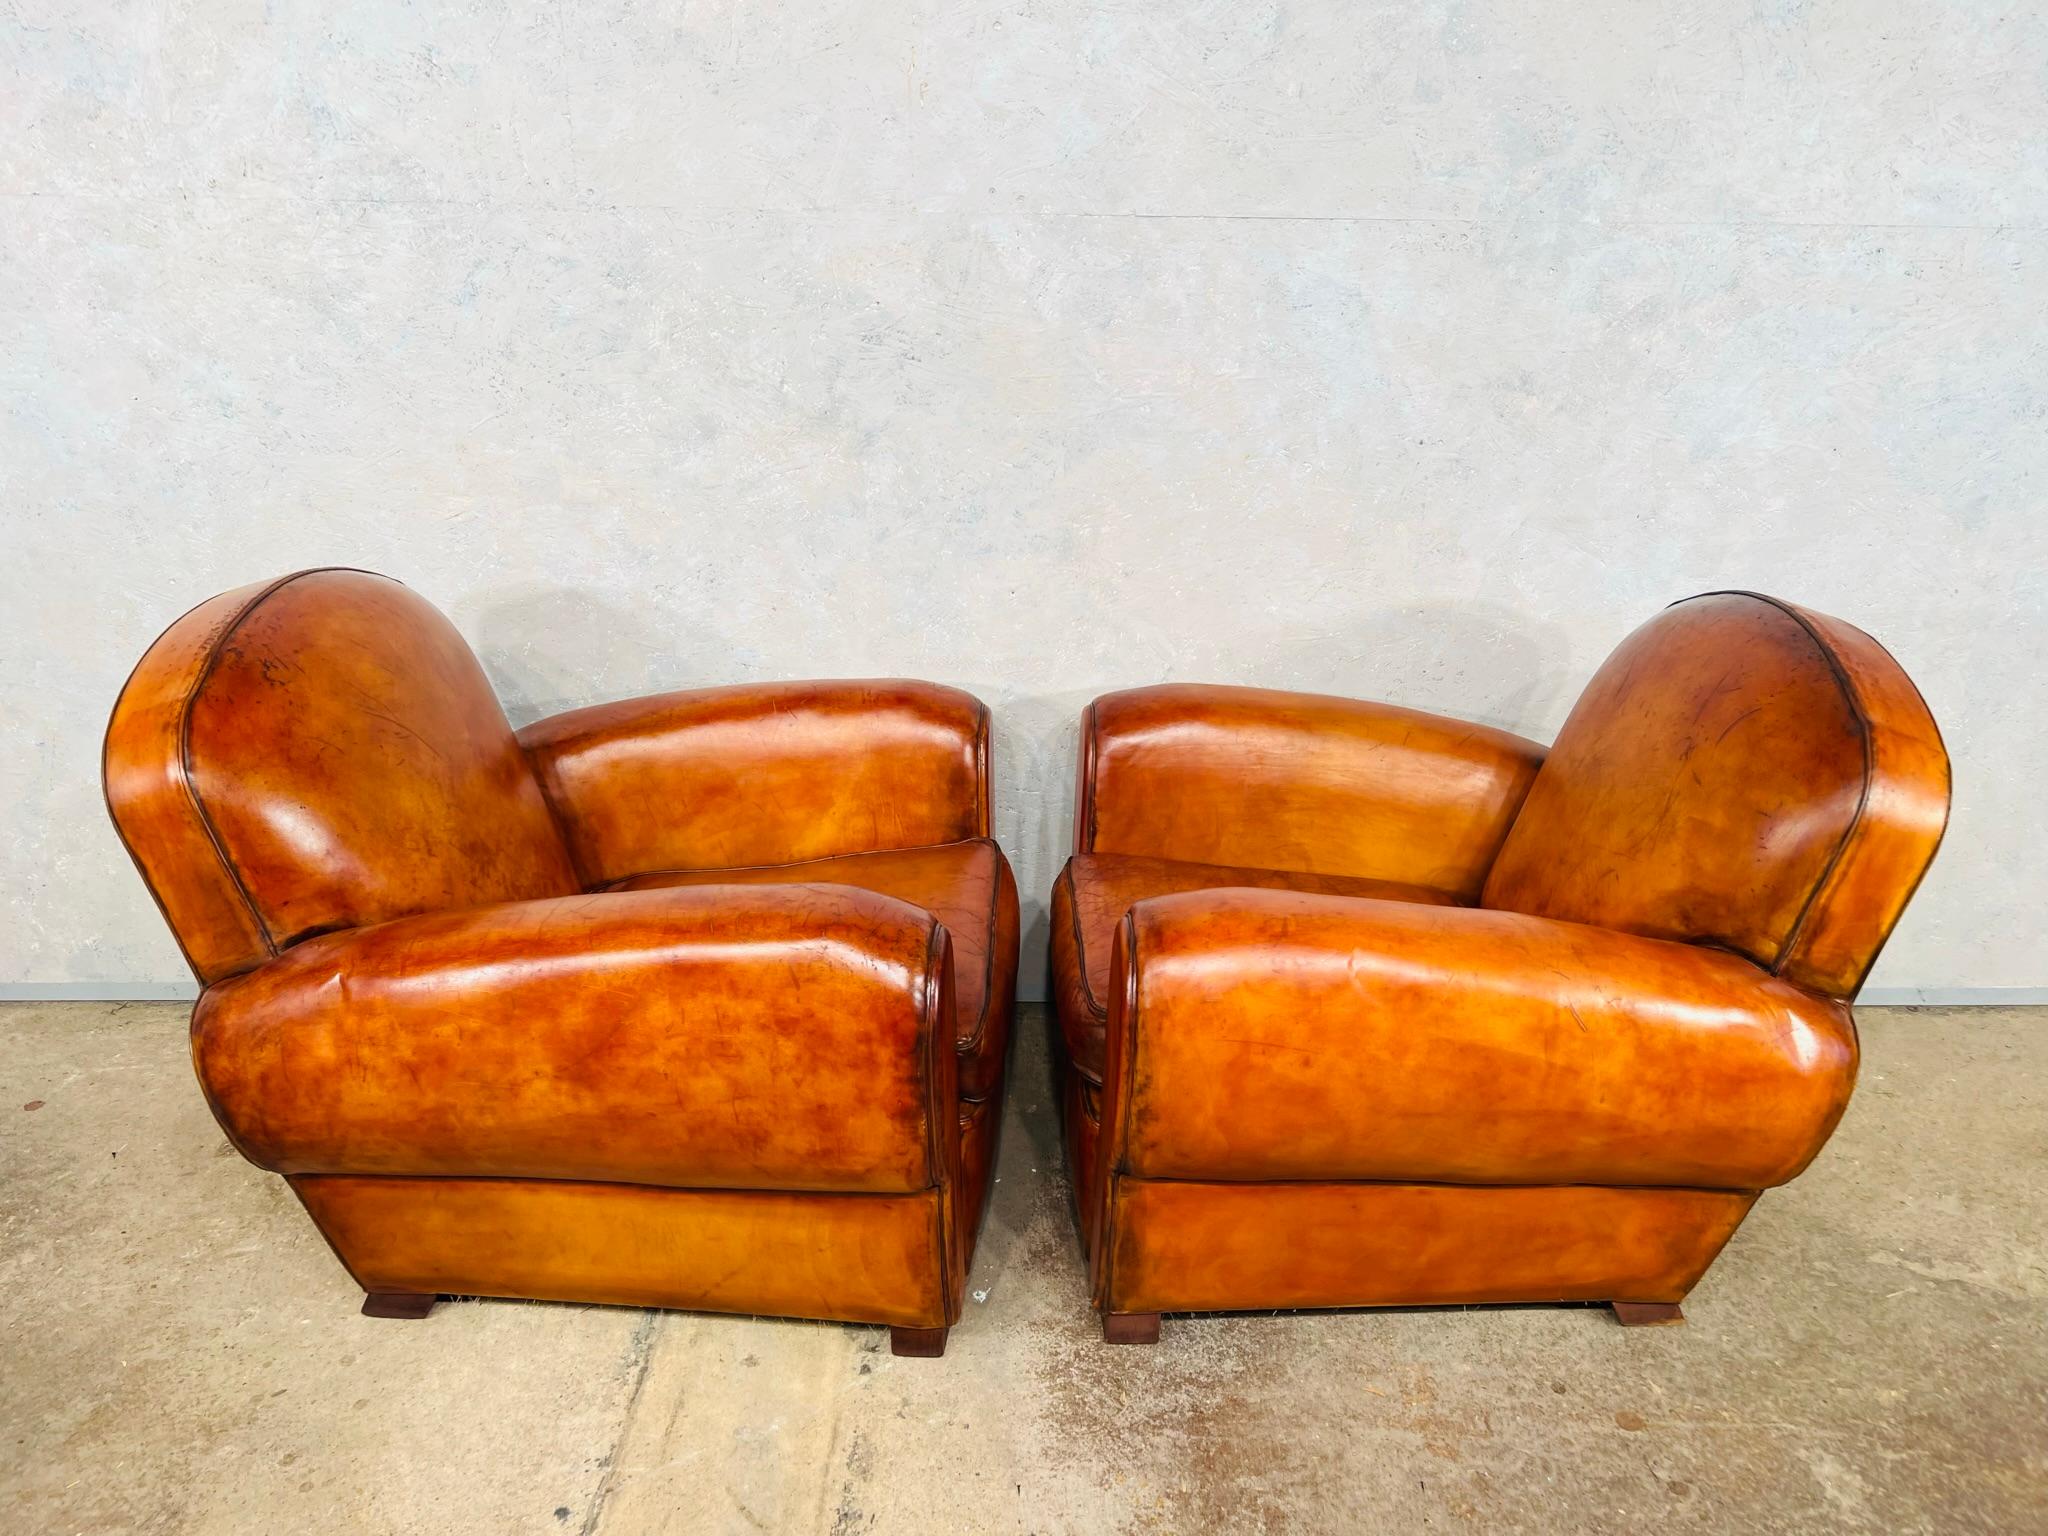 Stunning Pair of Leather French Club Chairs circa 1930 Patinated Cognac Color For Sale 6